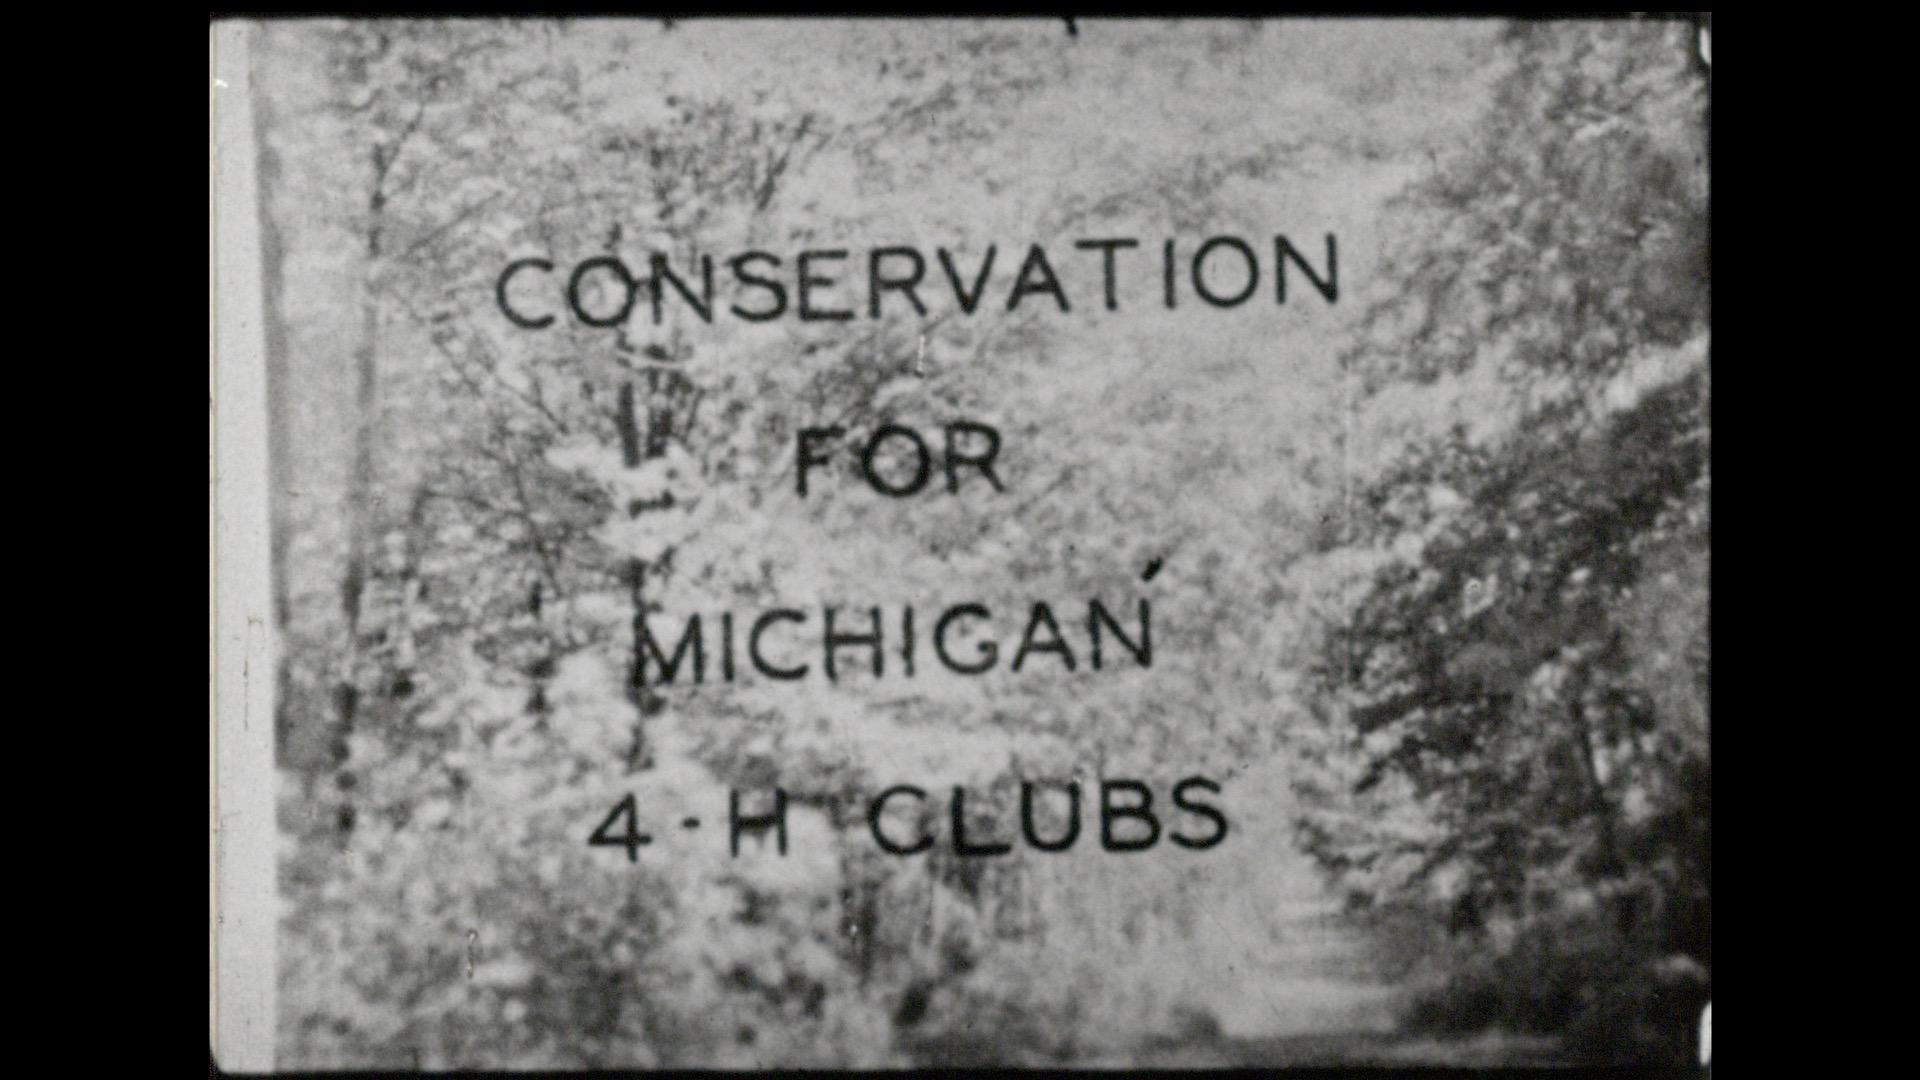 Conservation for Michigan 4-H Clubs, 1936-1937